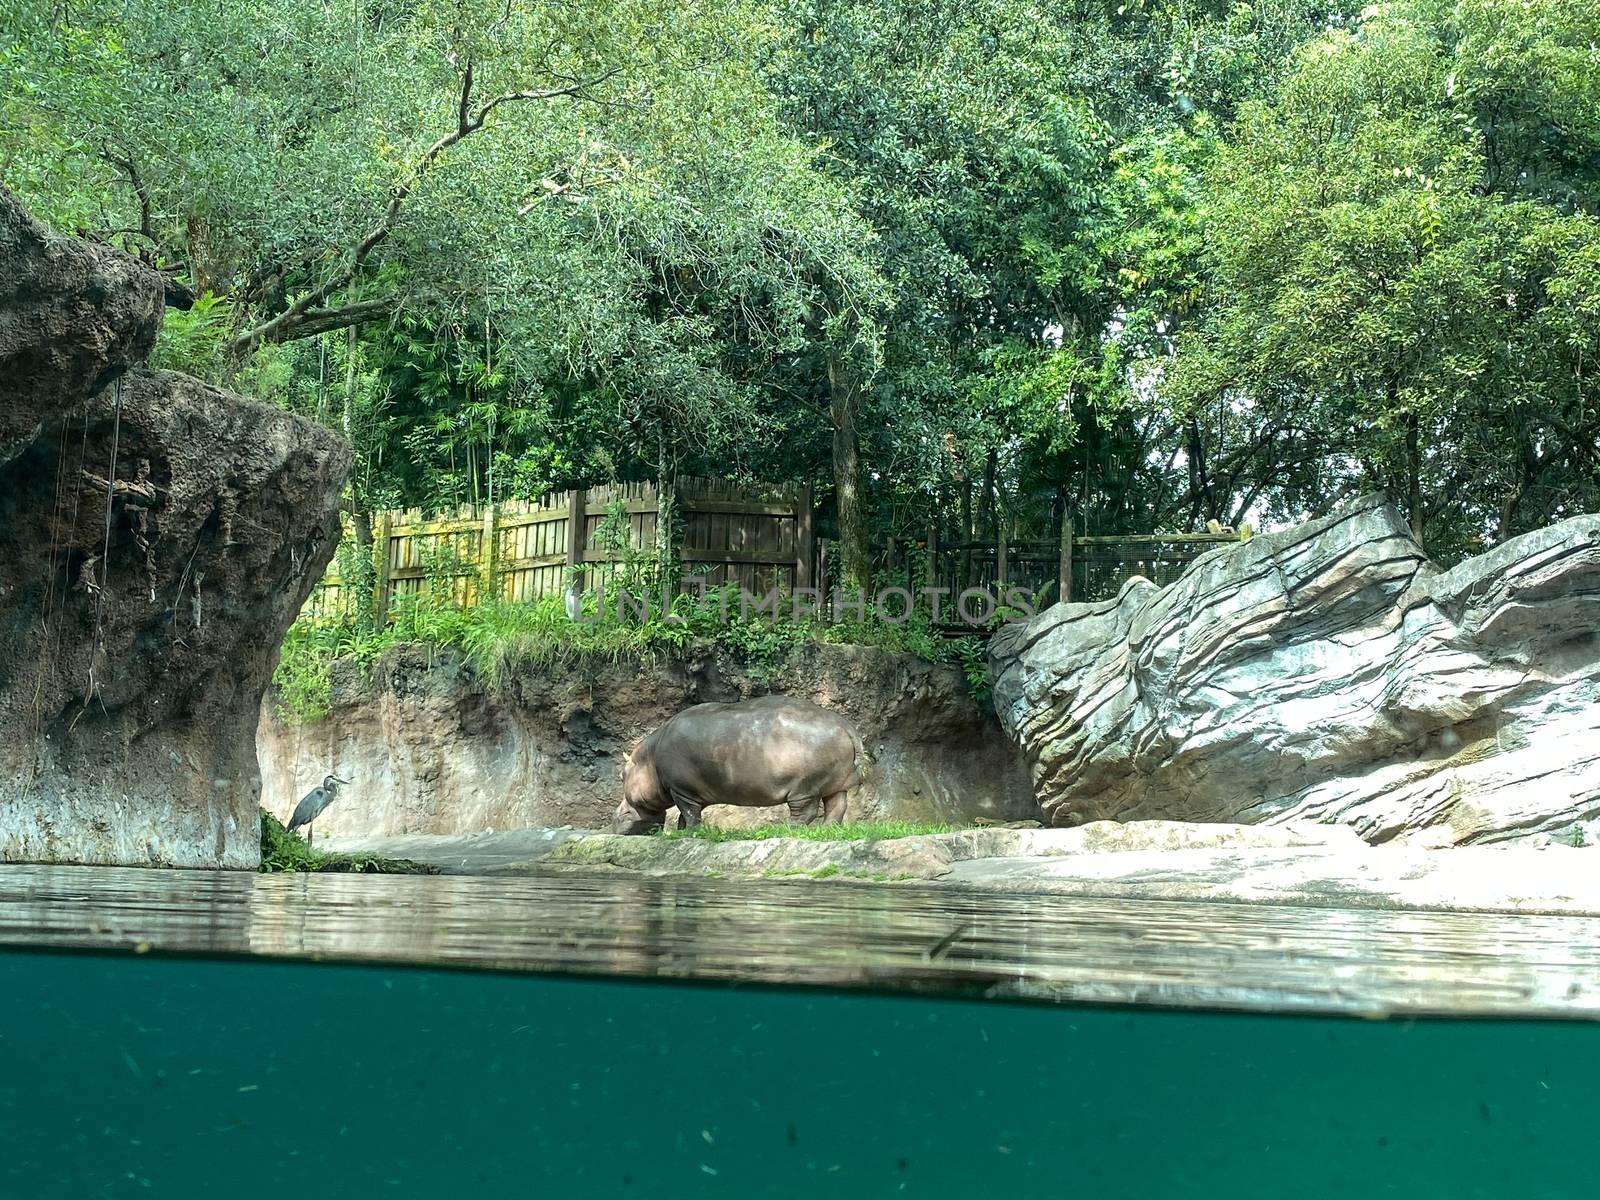 A Hippopotamus at a zoo near a pond on a bright sunny day.